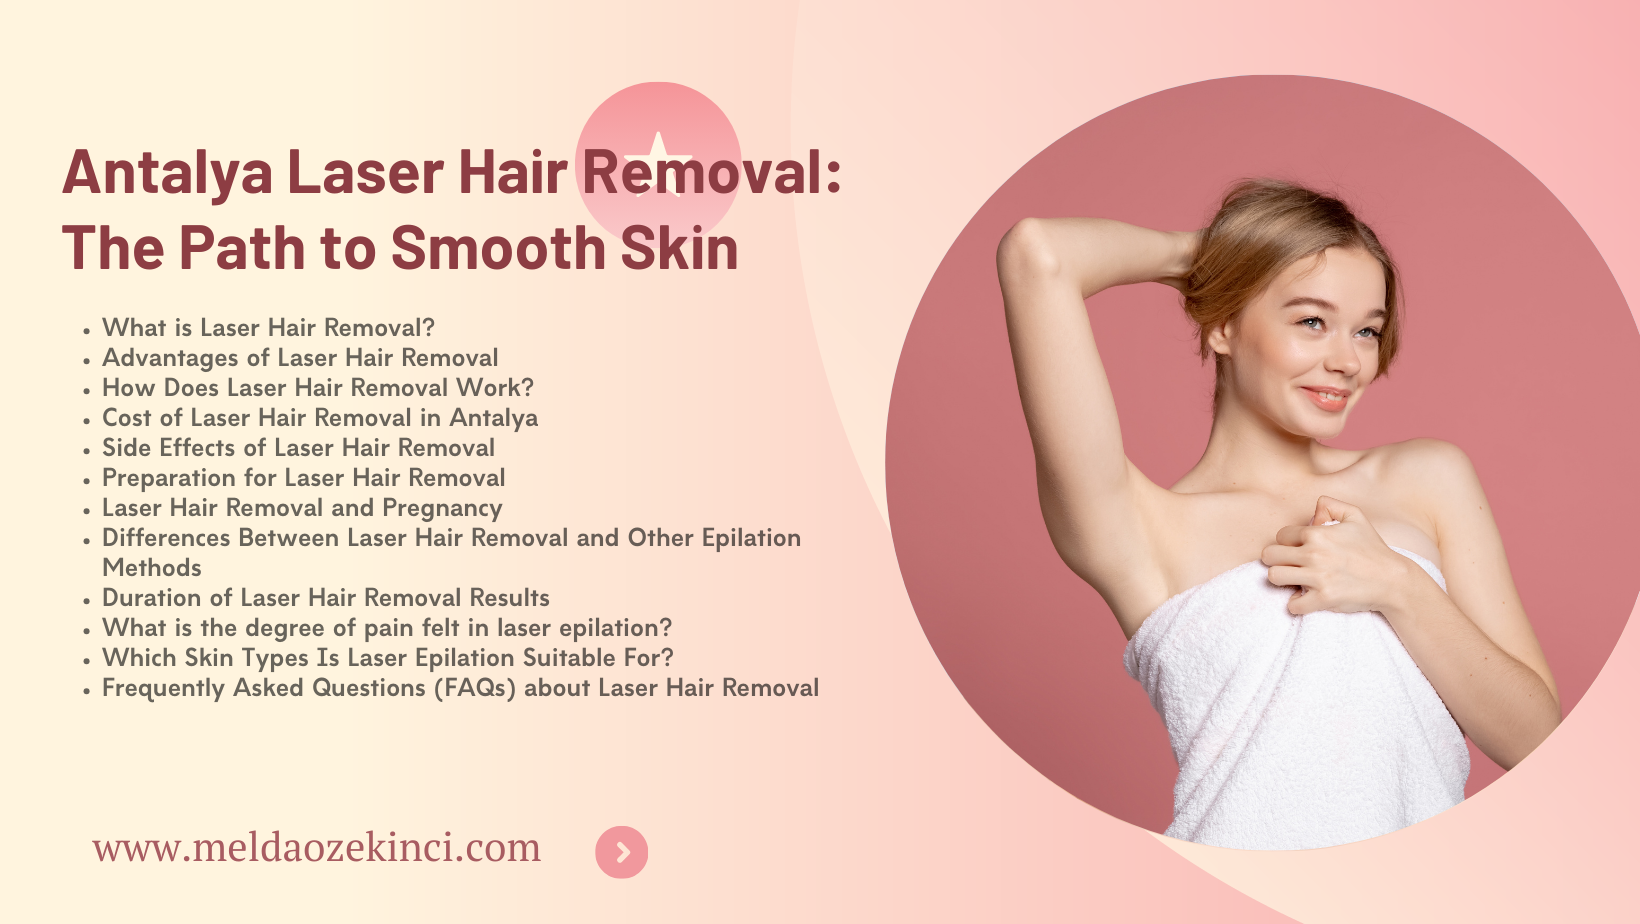 Antalya Laser Hair Removal: The Path to Smooth Skin